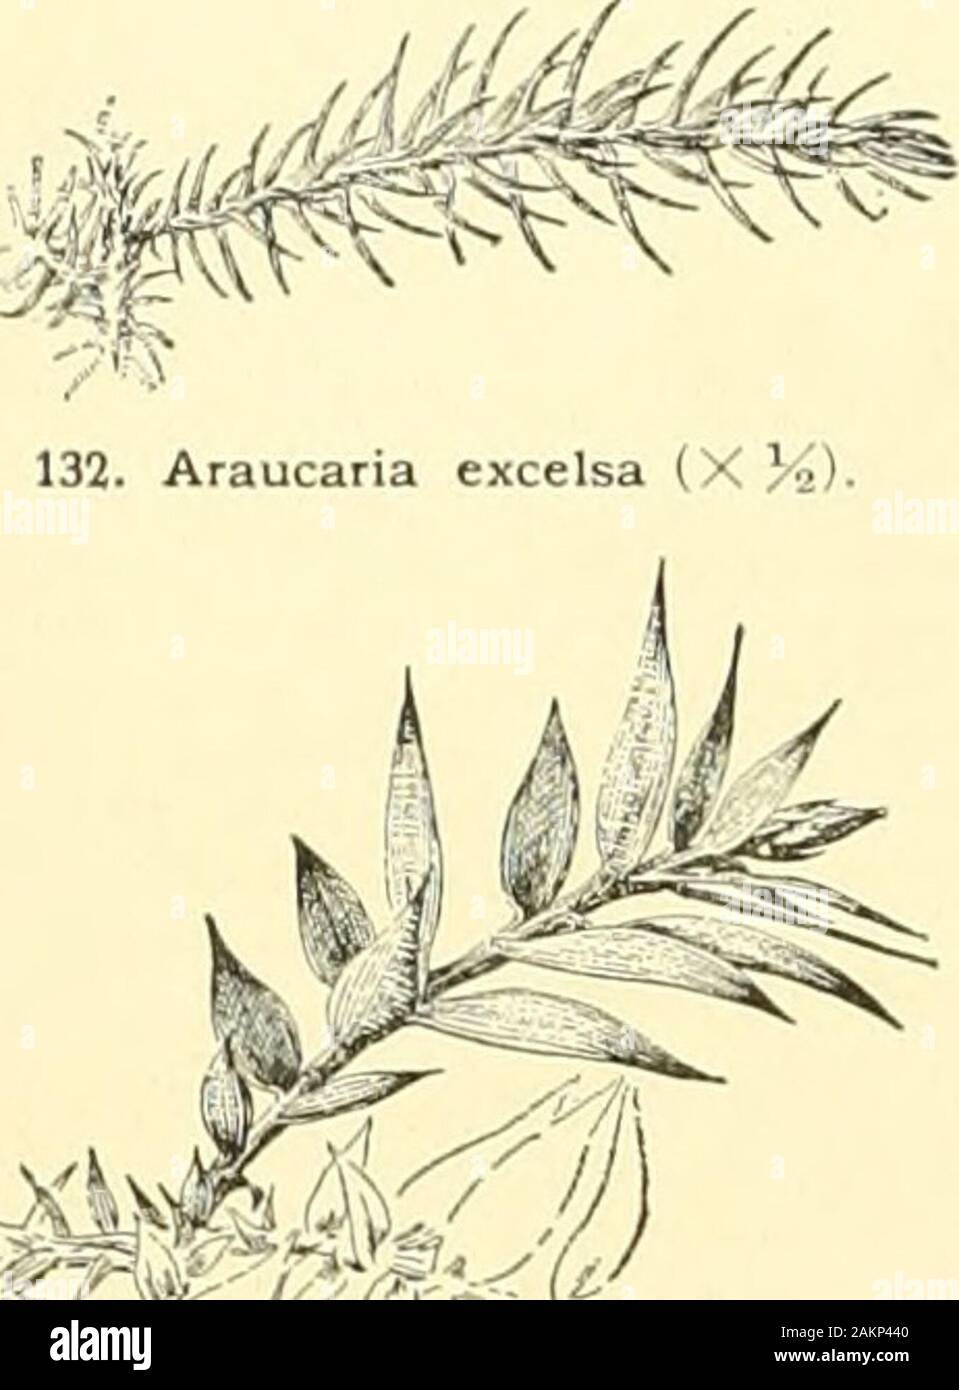 Cyclopedia of American horticulture, comprising suggestions for cultivation of horticultural plants, descriptions of the species of fruits, vegetables, flowers and ornamental plants sold in the United States and Canada, together with geographical and biographical sketches, and a synopsis of the vegetable kingdom . 131. Araucaria excelsa.A raeeed plant, z^ovra with insufficient nd attention. 90 ARAUCARIA ARCHOXTOPHCEXIX. 133. Araucaria Bidwillii (X %). 150 ft., and is known as Bunga-liunga. R.H. 1897, p.500. G.C. III. 15: 465, showing the pineapple-like cone.— One of the be.st and handsomest sp Stock Photo